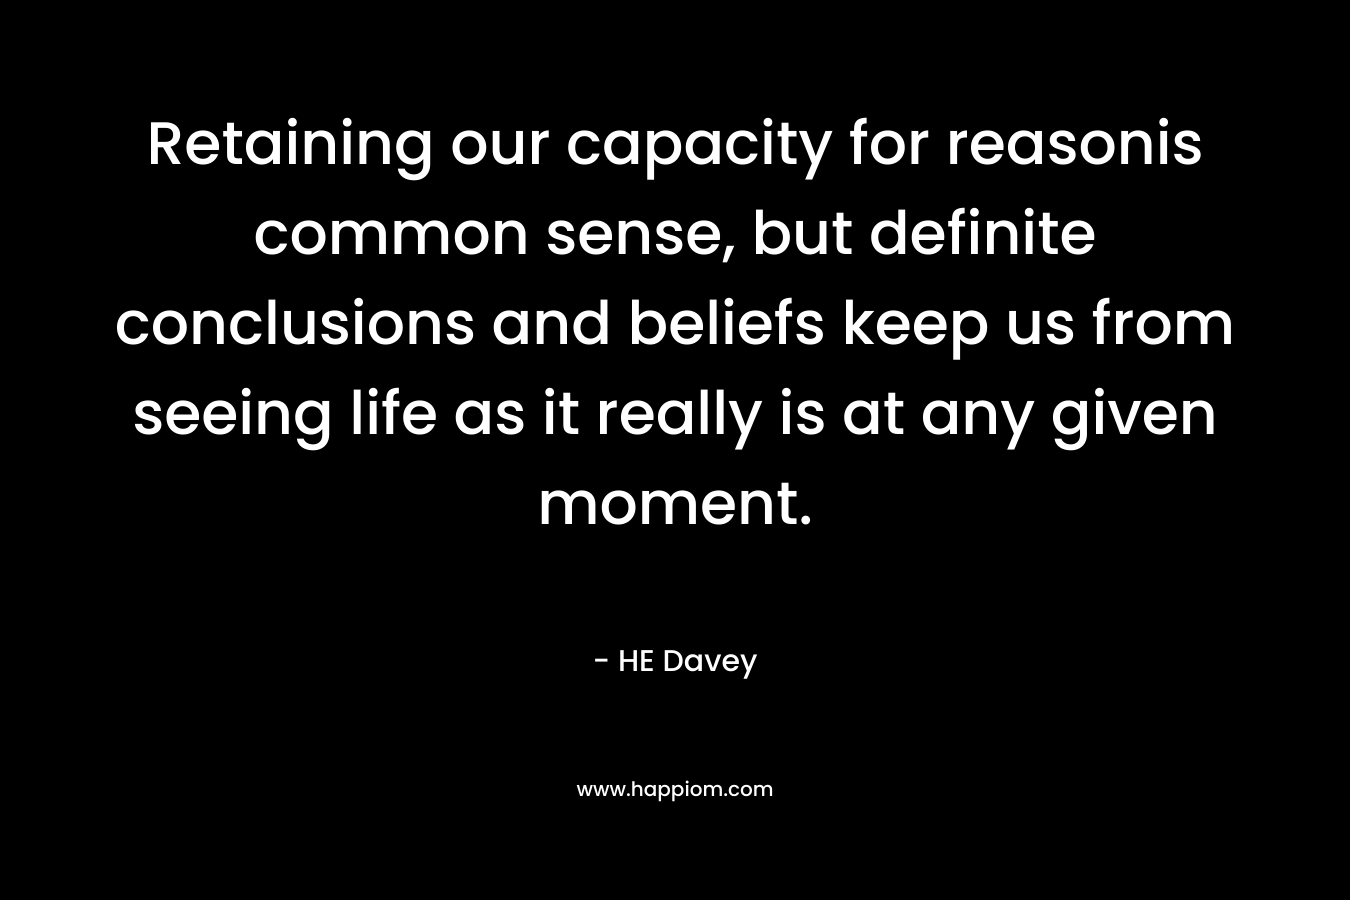 Retaining our capacity for reasonis common sense, but definite conclusions and beliefs keep us from seeing life as it really is at any given moment. – HE Davey